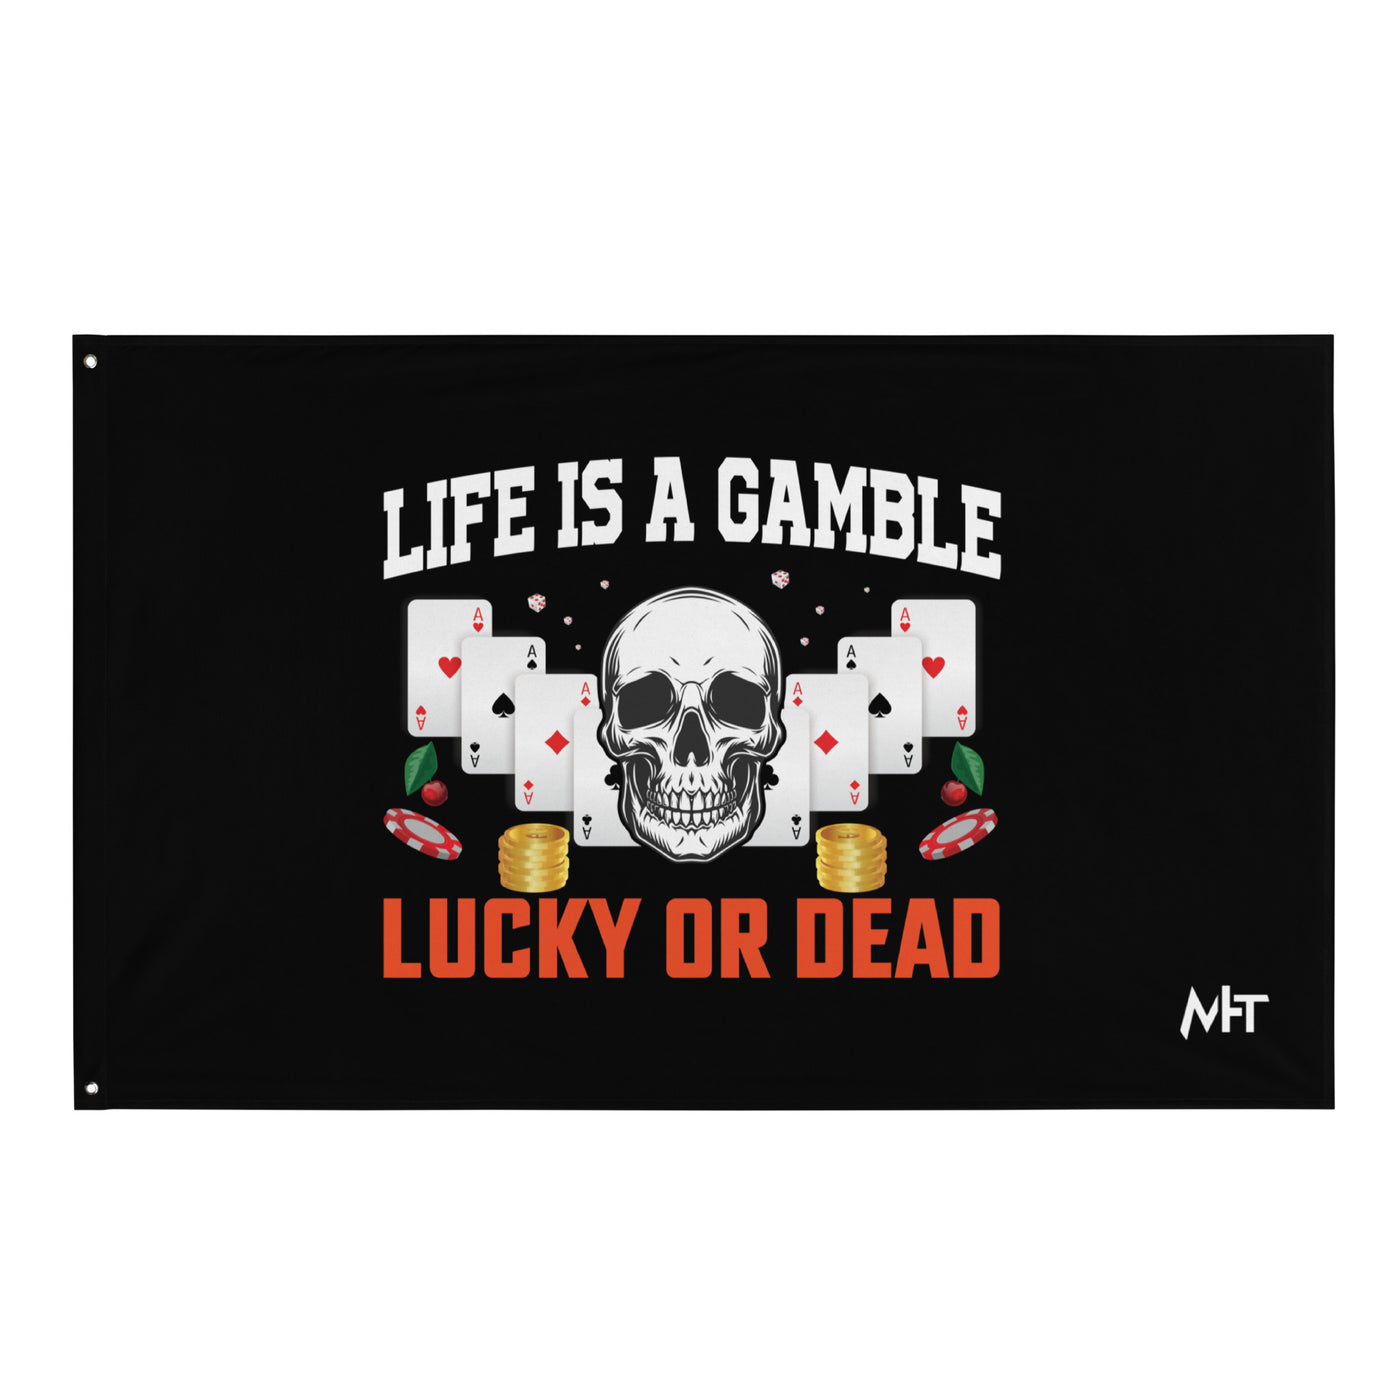 Life is a Gamble; Lucky or Dead - Flag